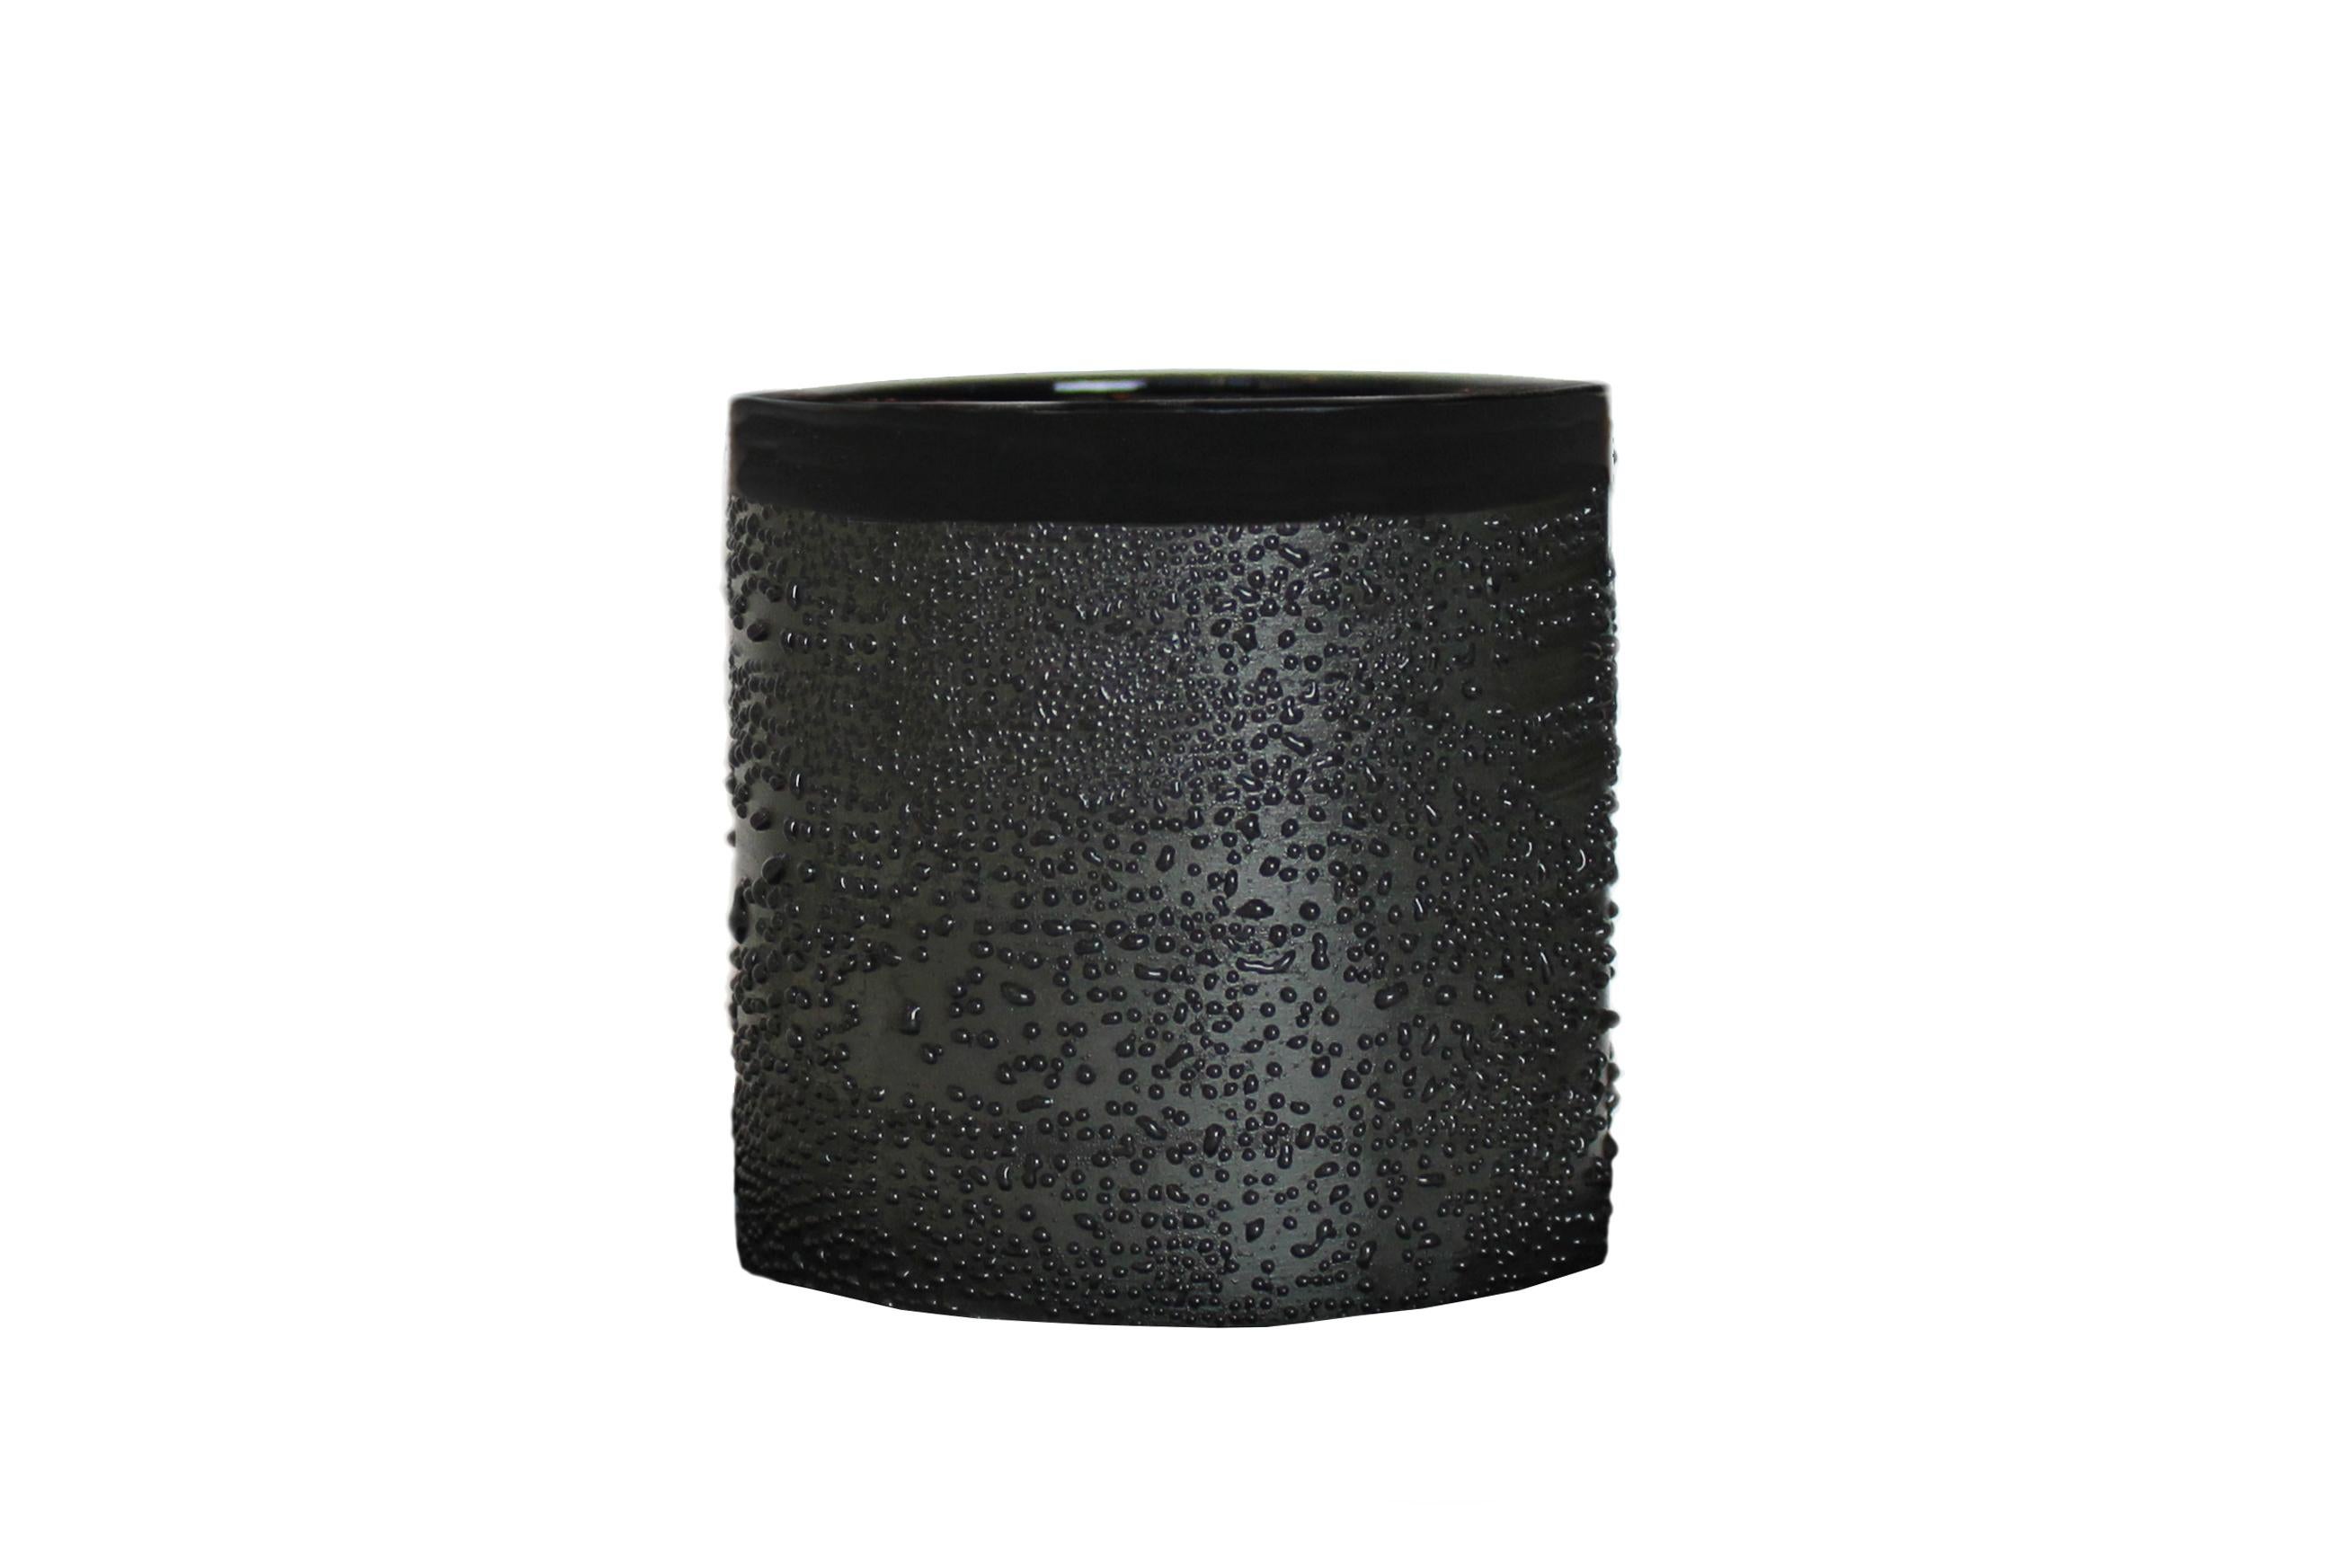 Handmade stoneware cup.  Glossy black interior and rim with textured dew glaze body.  Also available in white and brown.  Handmade by Malka Dina in Brooklyn, NY.
Due to the handmade nature of this item, each piece will be slightly unique and some